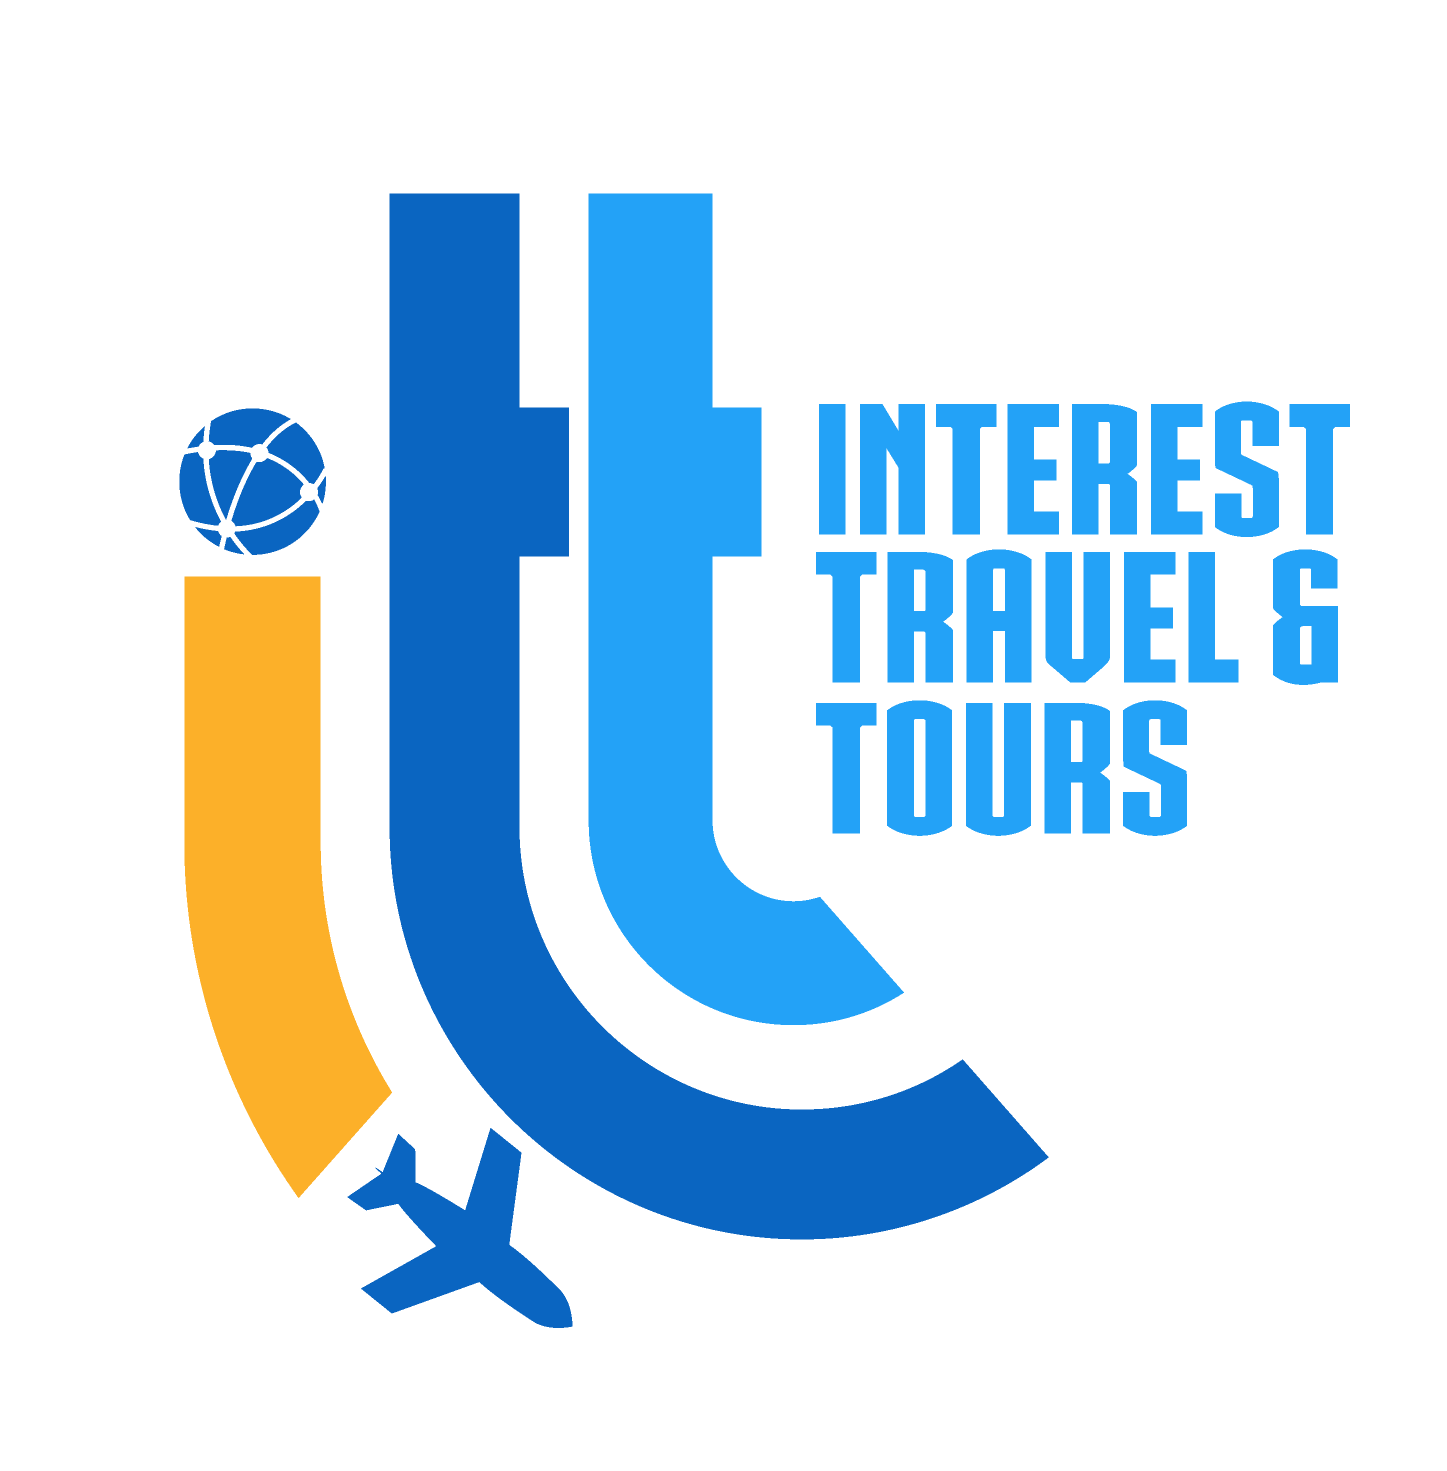 Interest Travel And Tours | Central and Southwest Ghana tour - Interest Travel And Tours